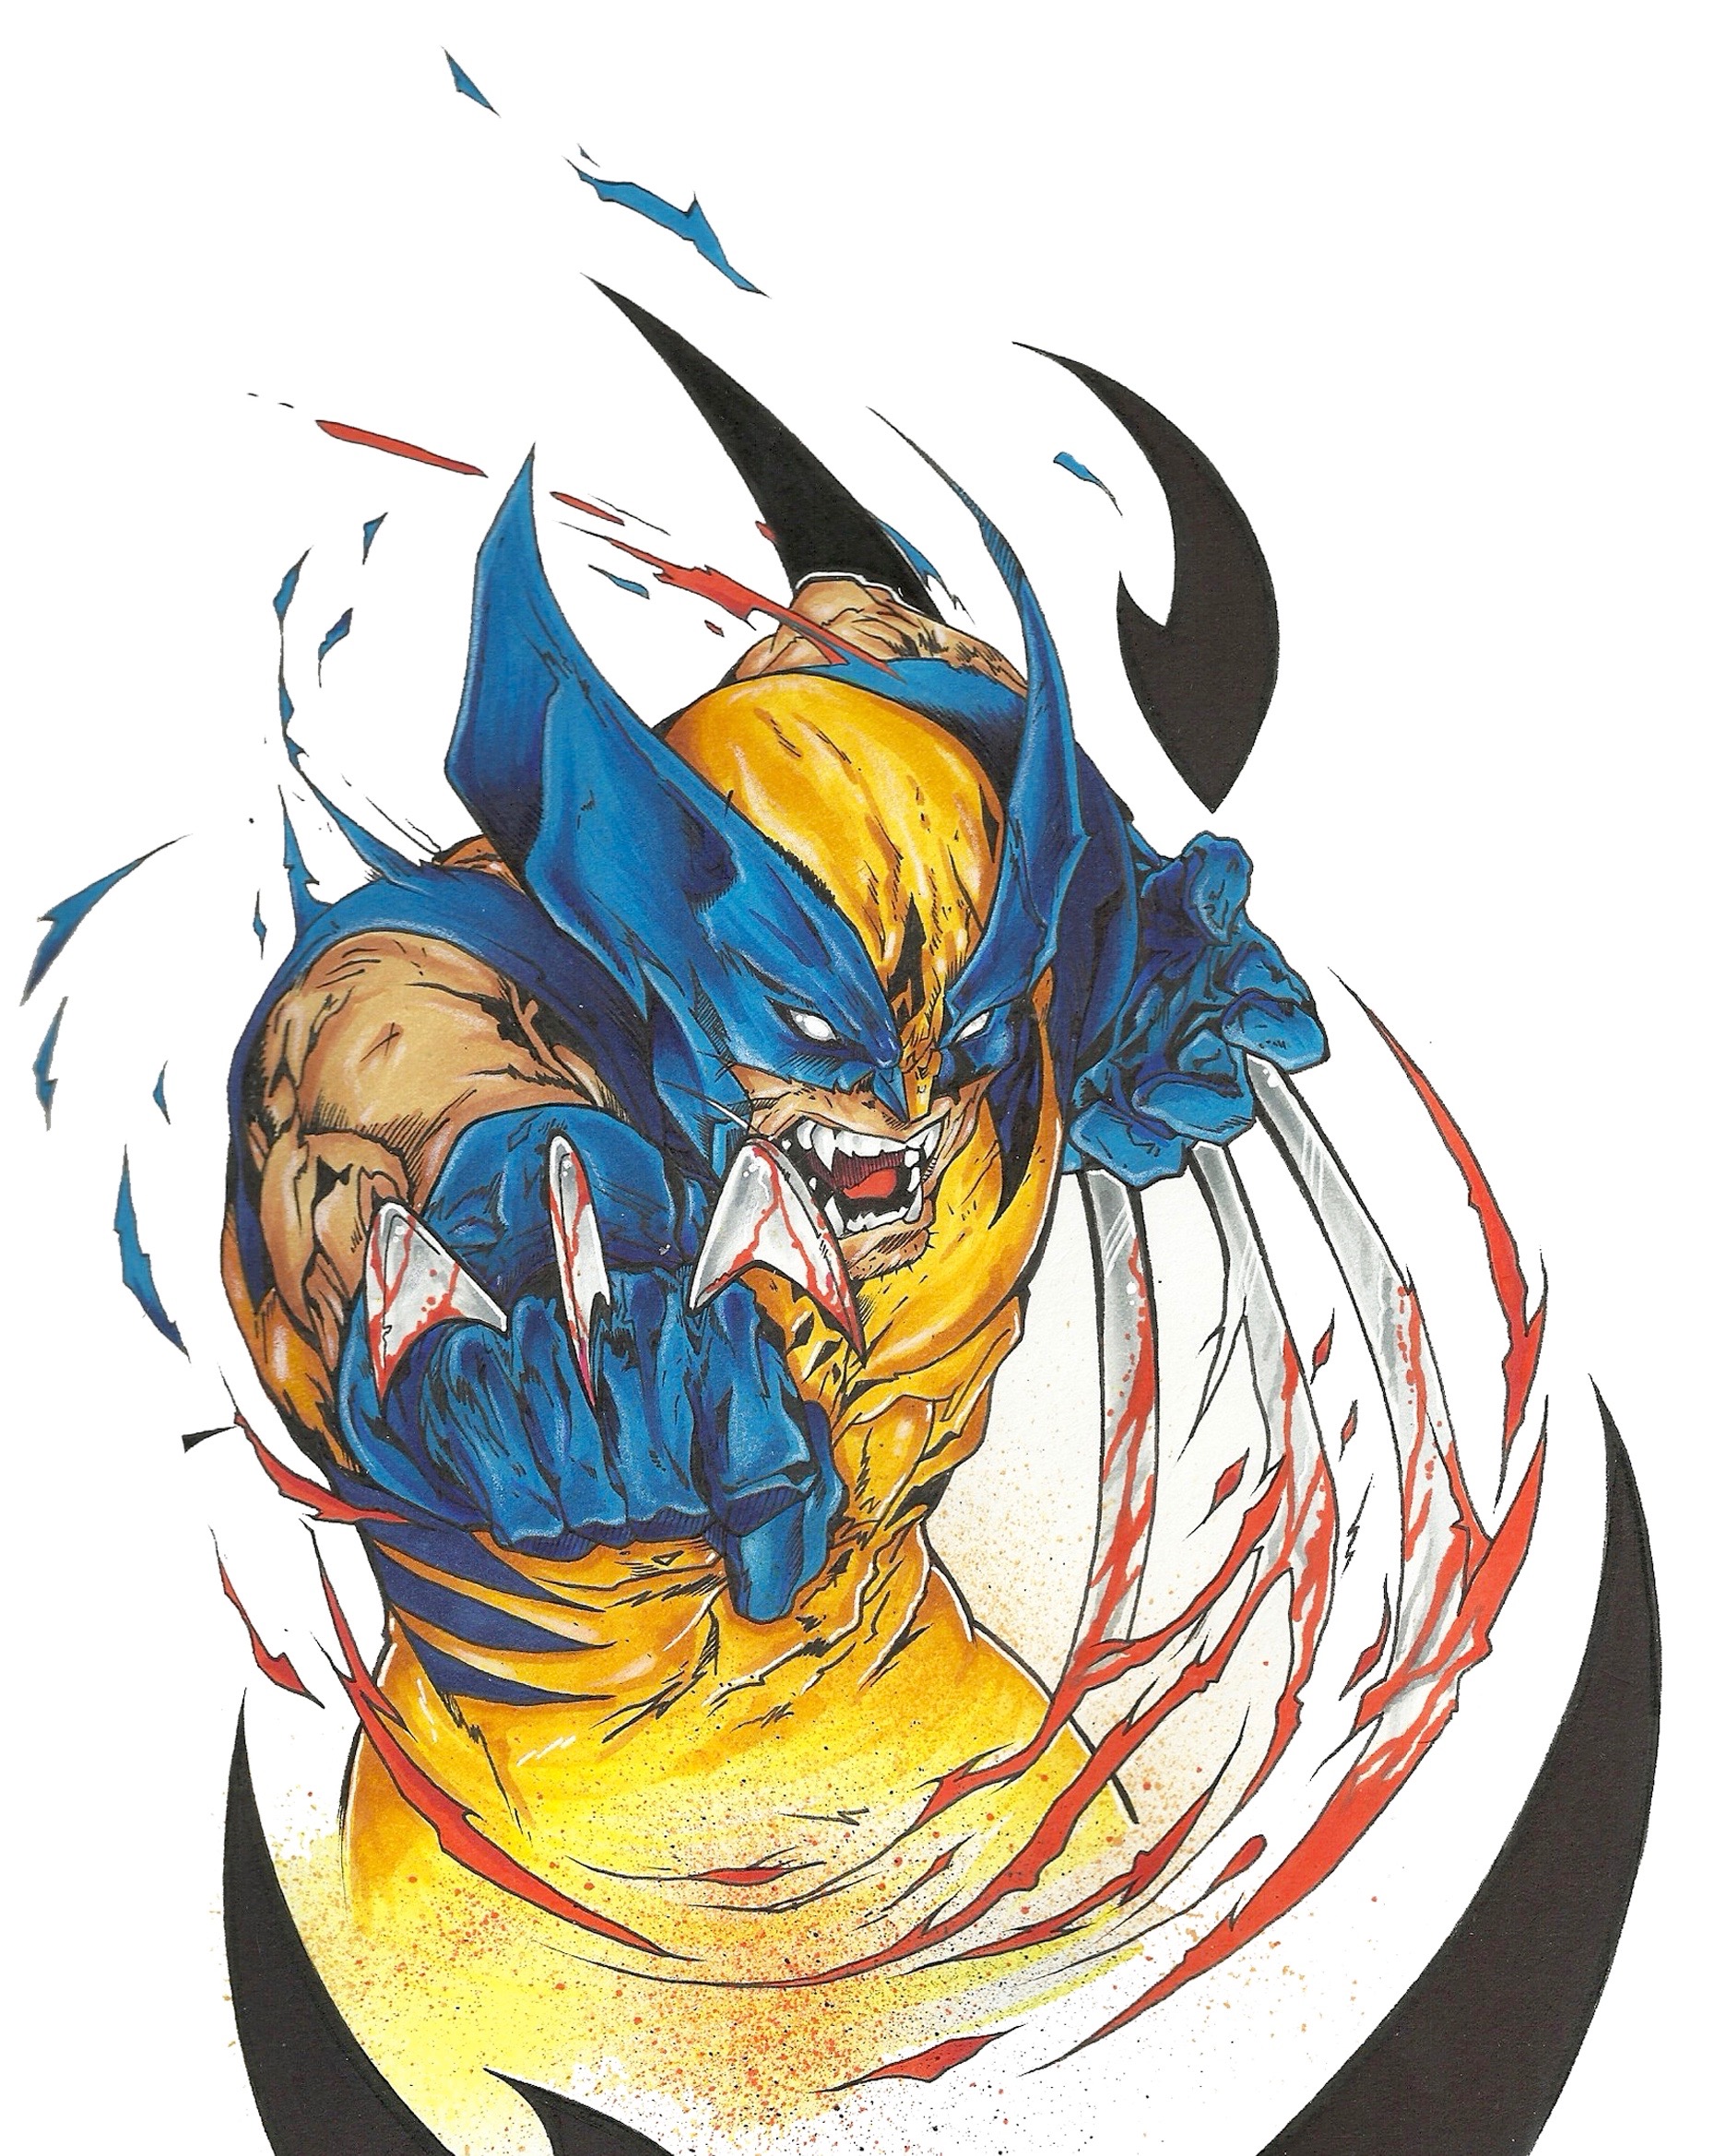 Wolverine by Nover, Markers on Paper, 2014.